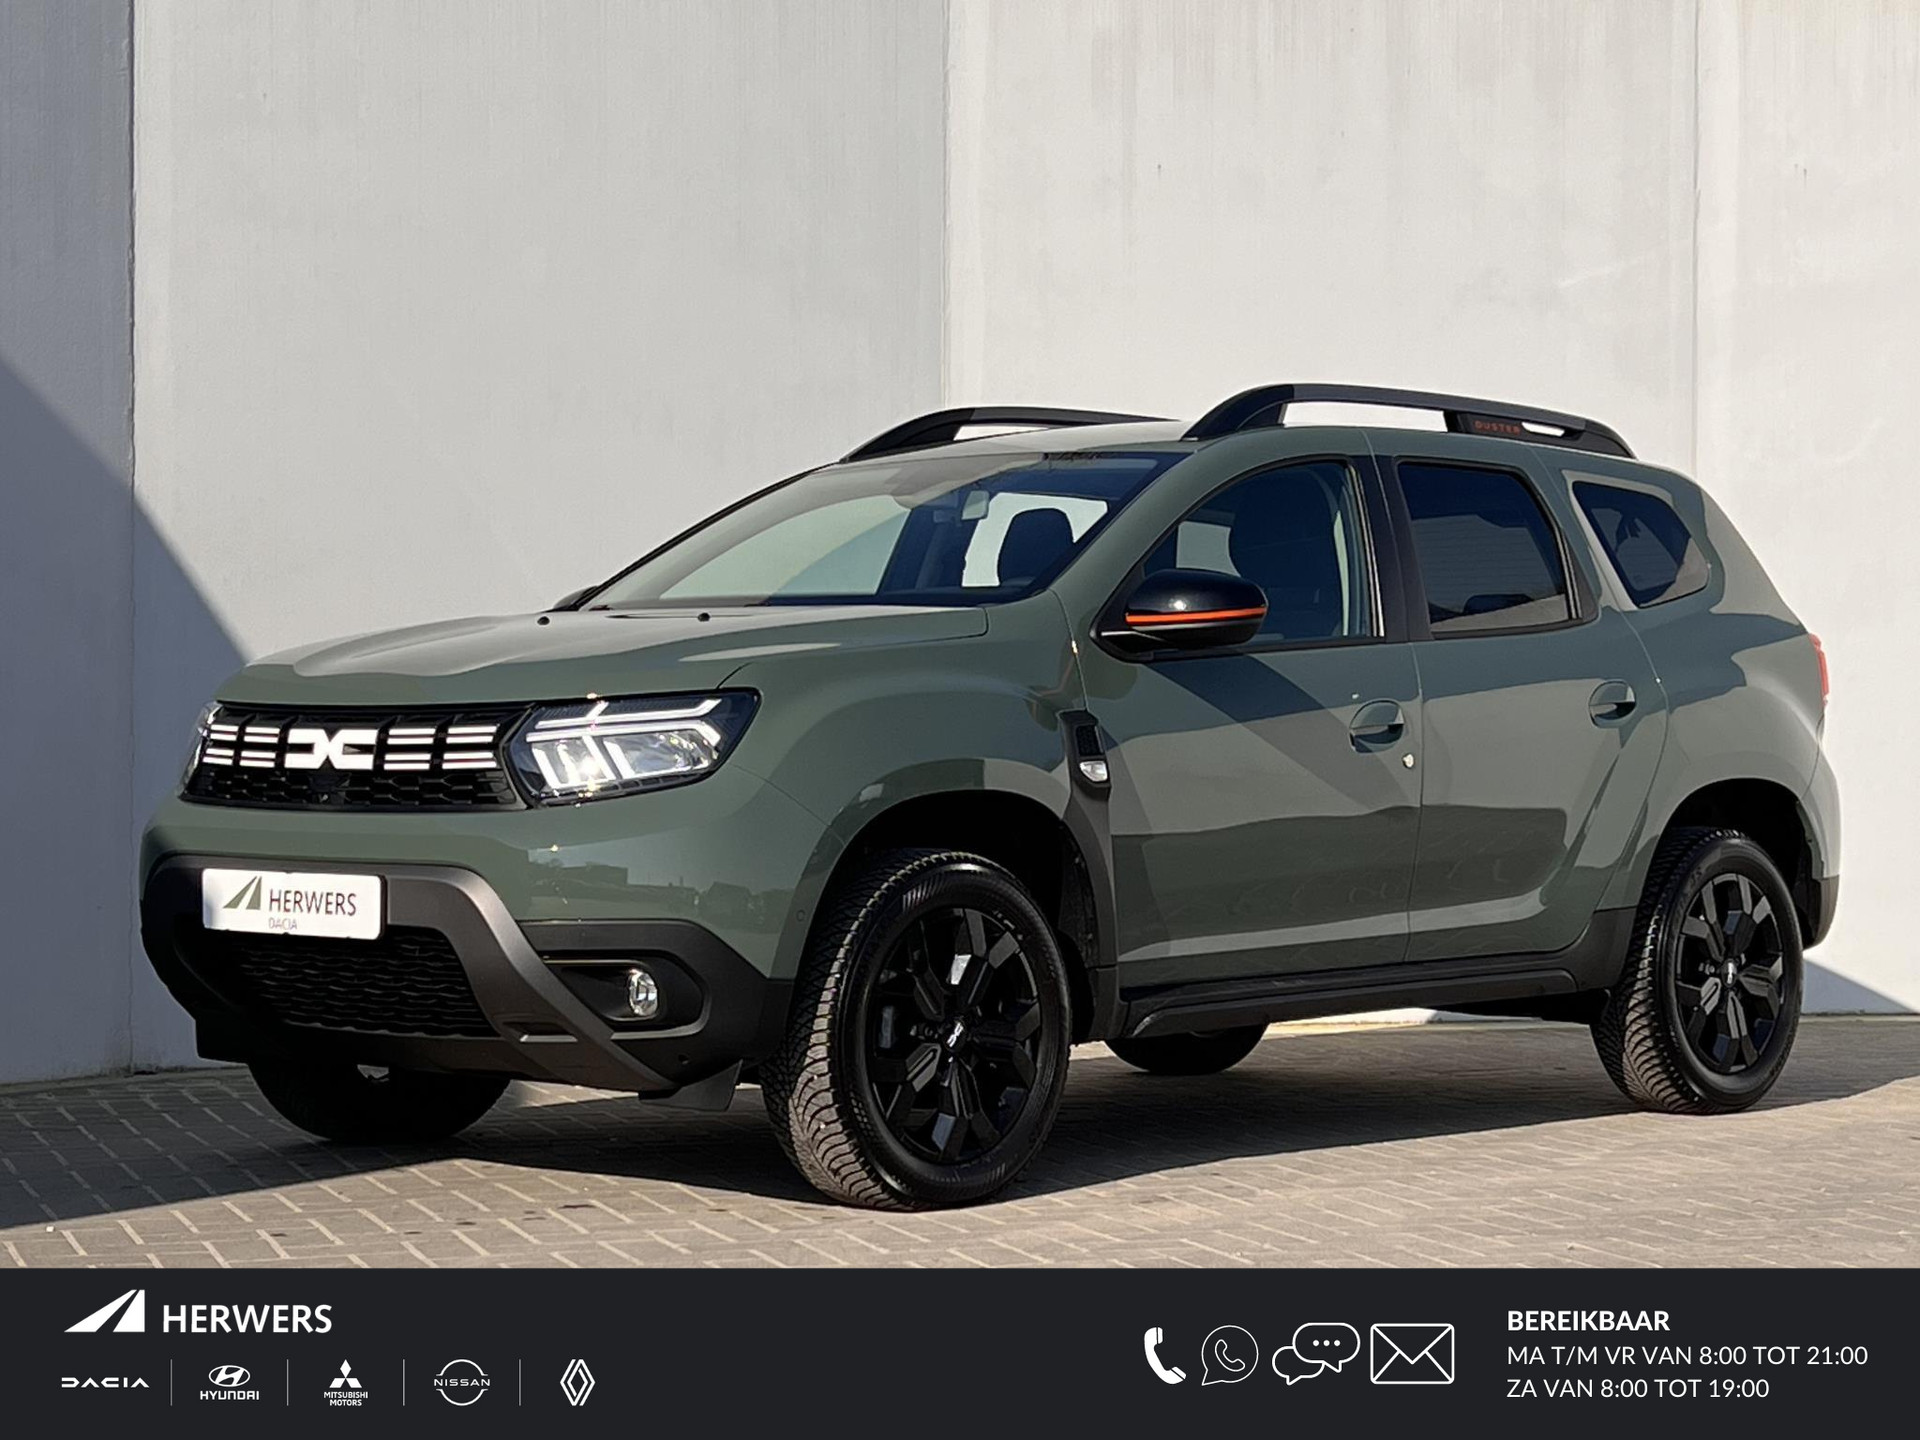 Dacia Duster 1.3 TCe 150 Extreme Automaat / Navigatie / Camera 360° / Apple Carplay Android / All Season banden /